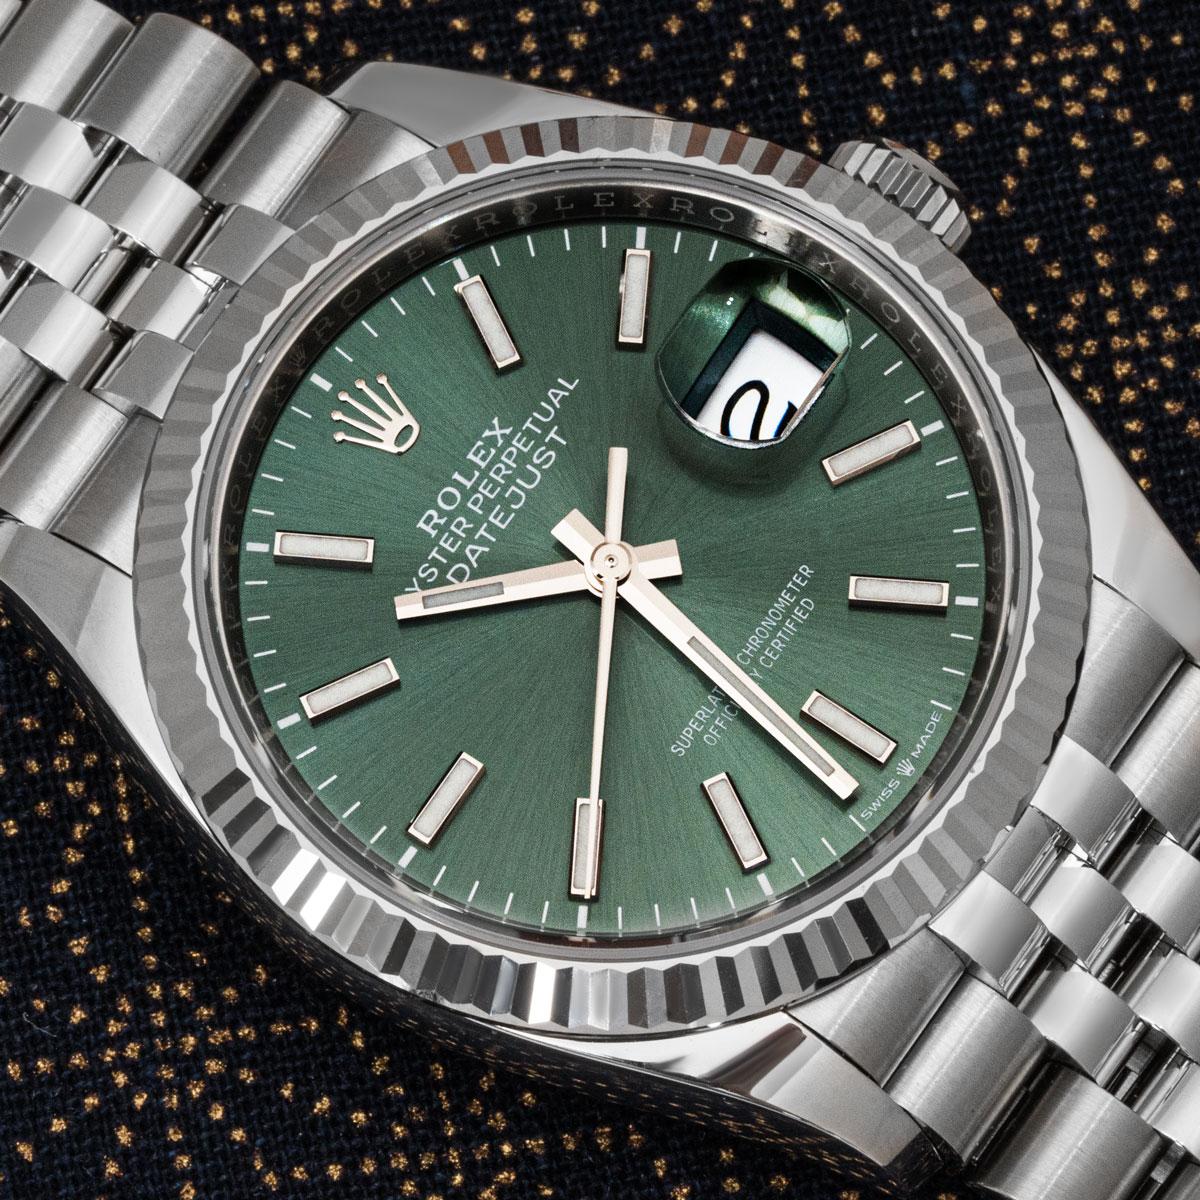 An Oystersteel 36mm Datejust from Rolex. Featuring the desired mint green dial with hour markers and a fluted bezel in white gold. Presented on a Jubilee bracelet with an Oysterclasp. The watch is fitted with a scratch-resistant sapphire crystal and